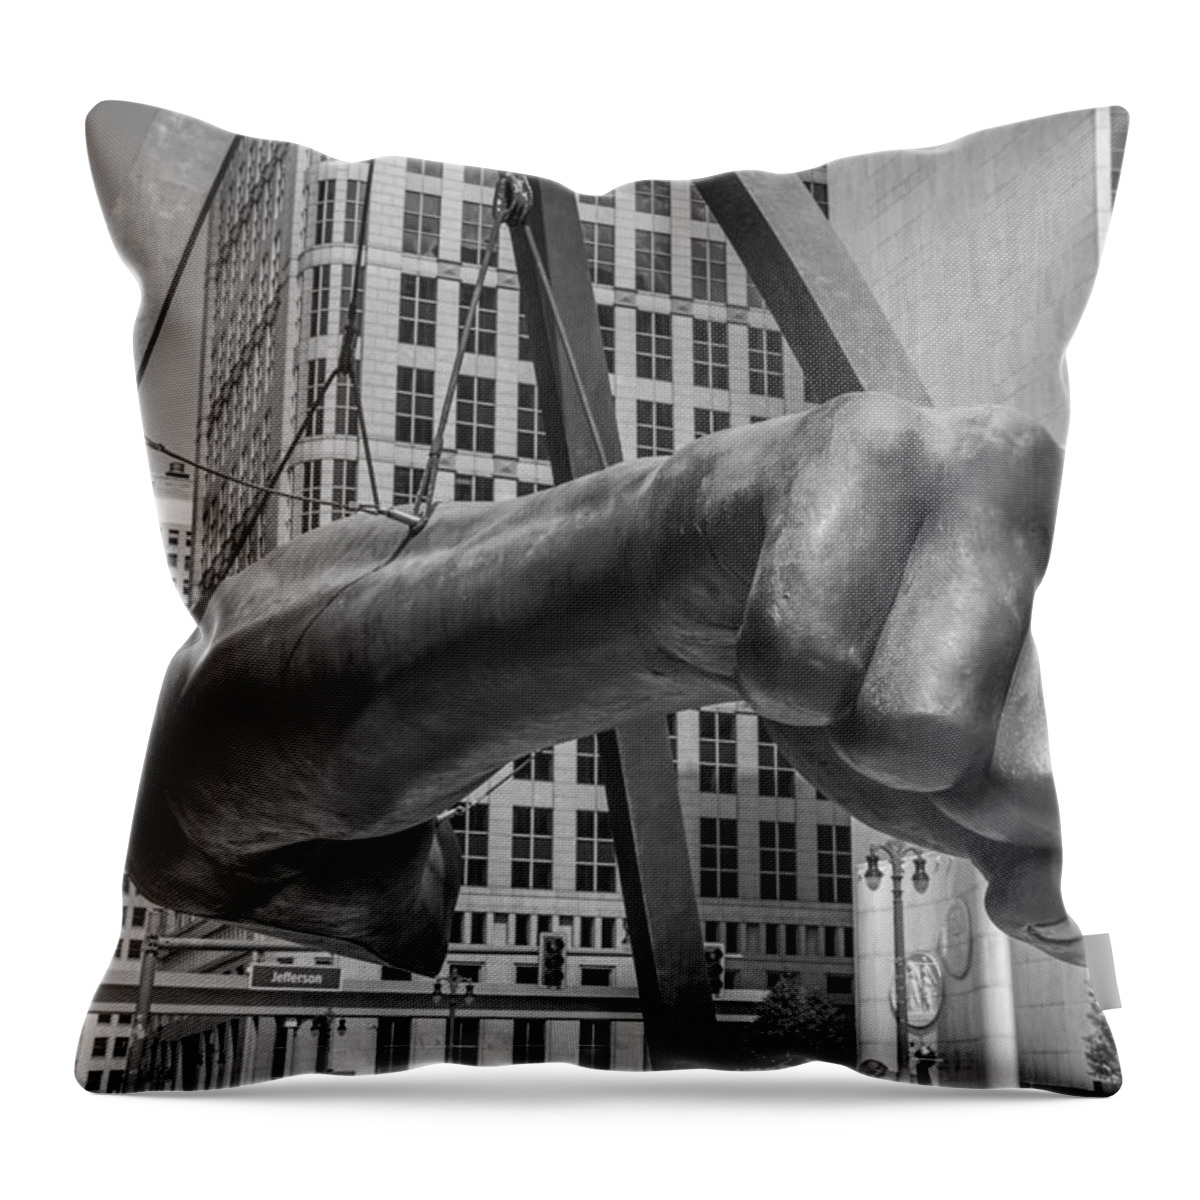 Detroit Throw Pillow featuring the photograph Close Up of Joe Louis Fist Black and White by John McGraw